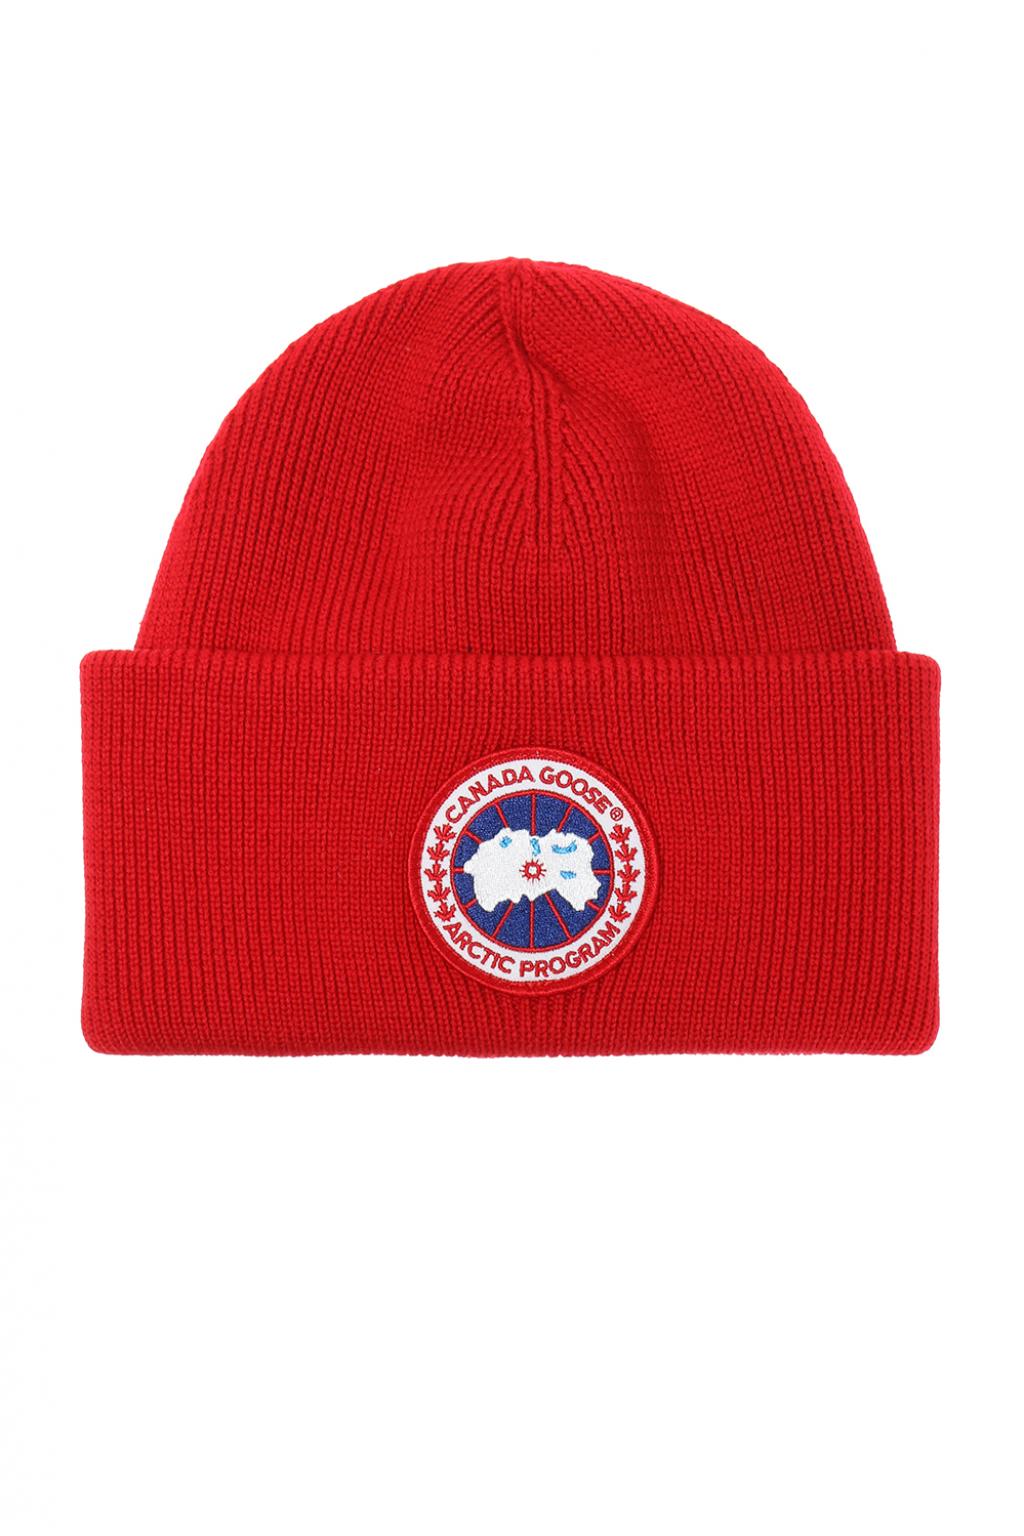 Canada Goose Wool hat Swimming with a logo